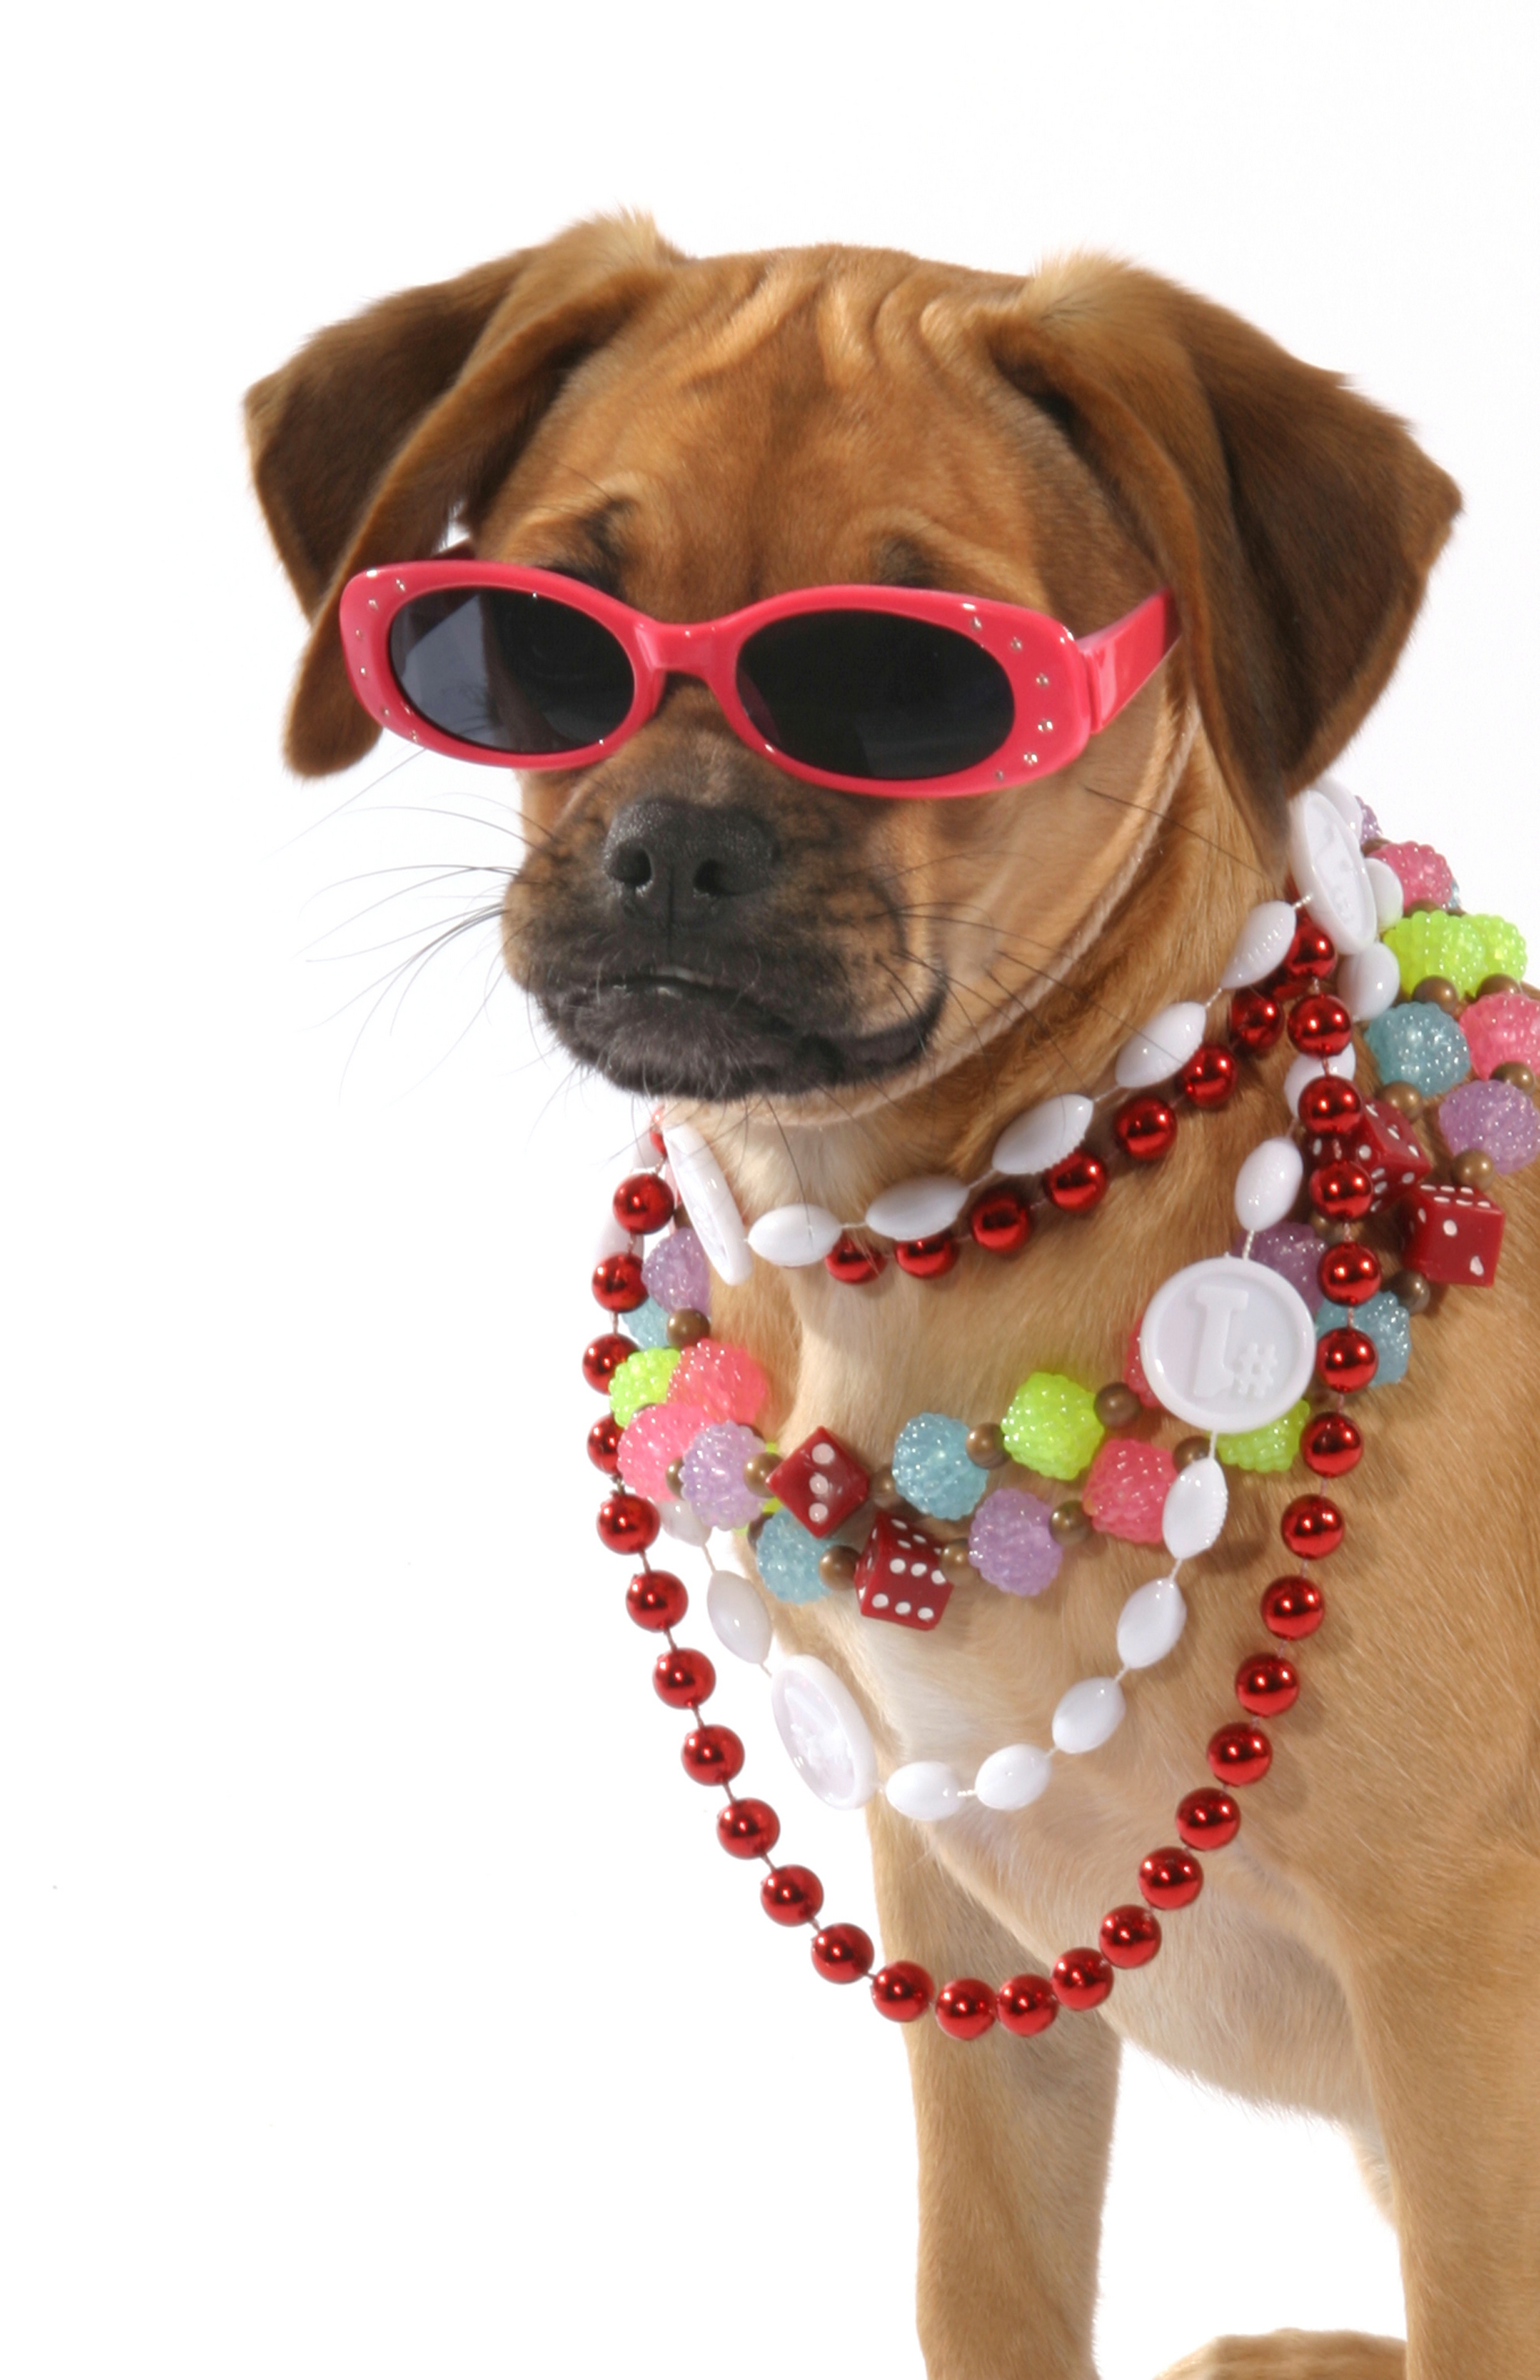 Dog all dressed up in beads